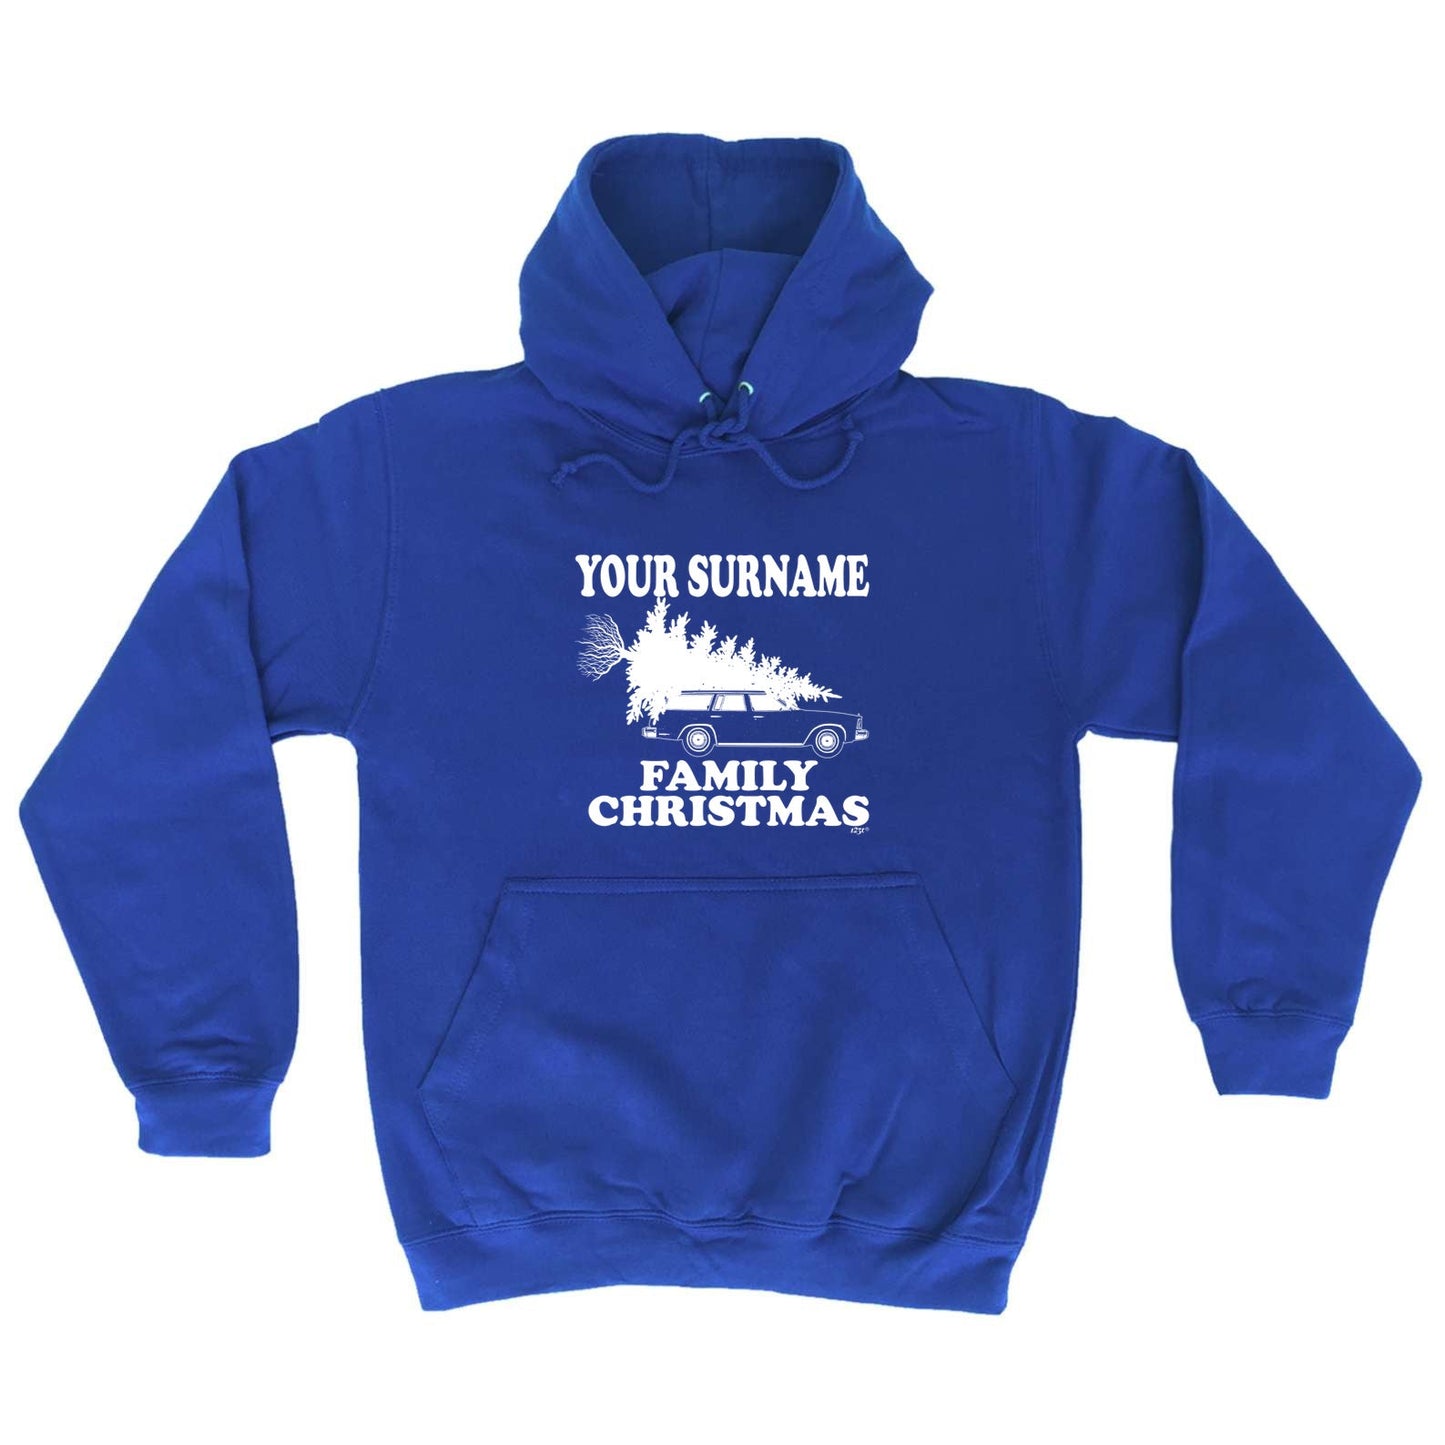 Family Christmas Your Surname Personalised - Funny Hoodies Hoodie